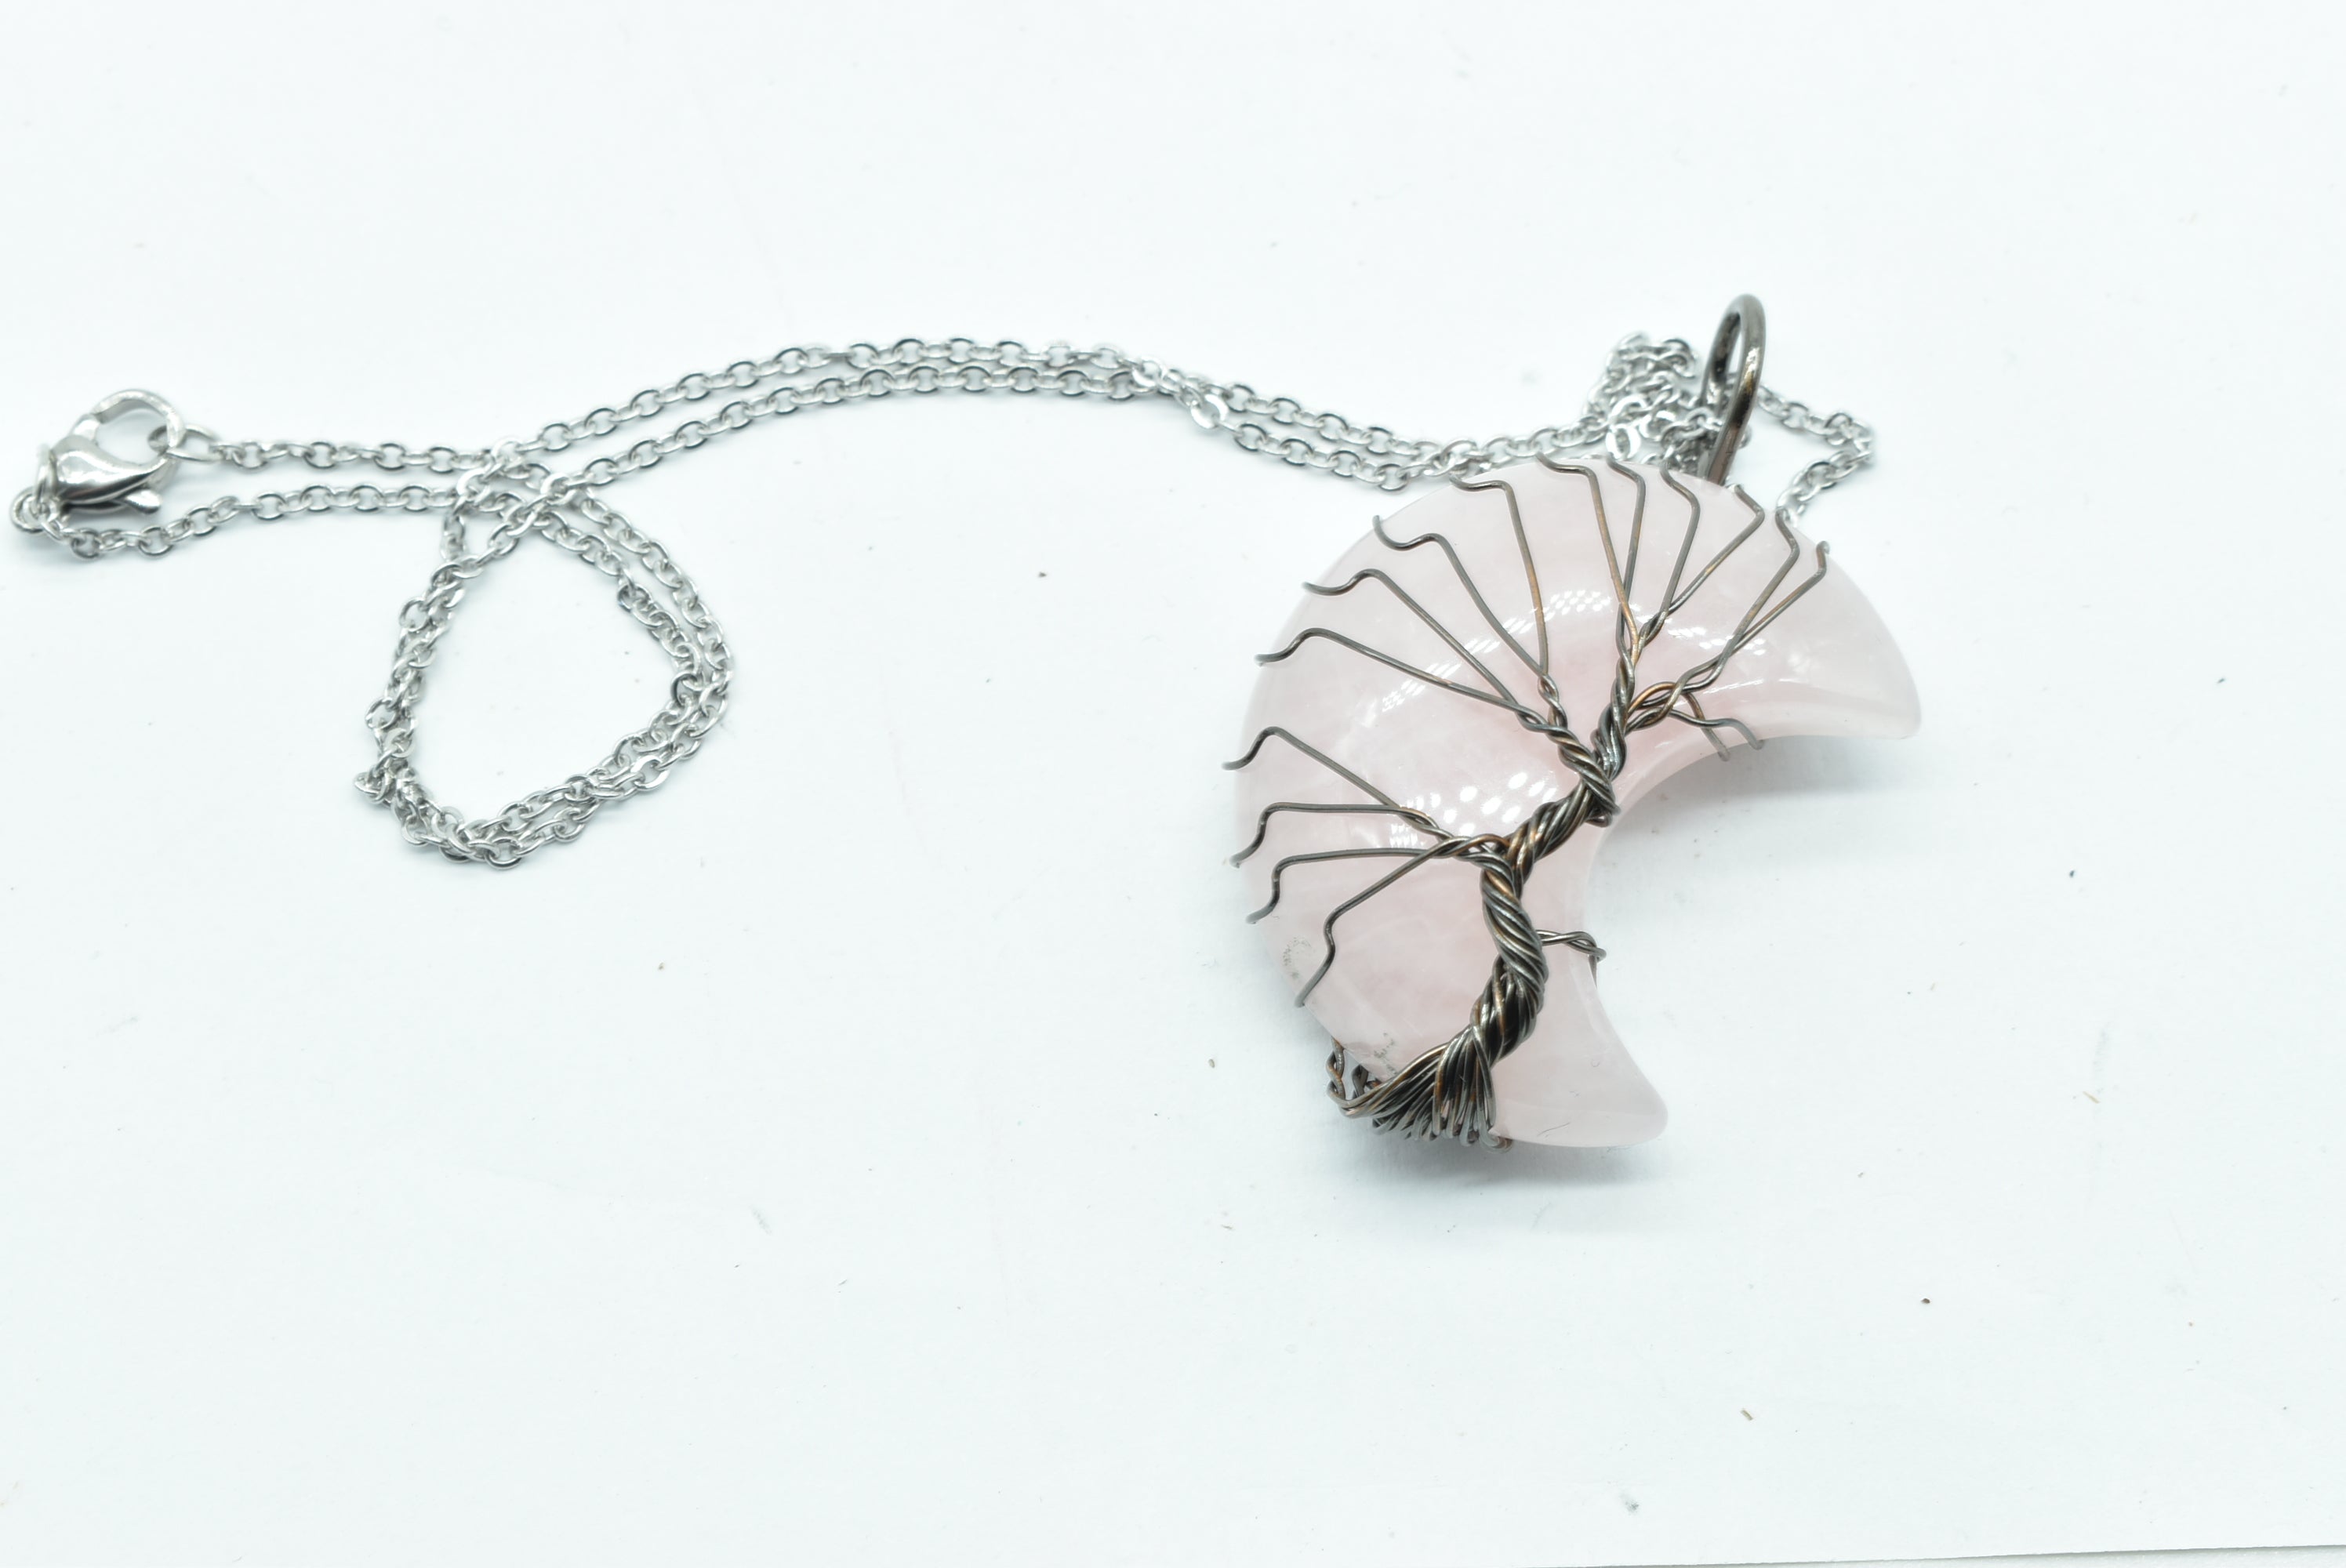 Rose Quartz Moon Pendant wrapped in silver colored wire